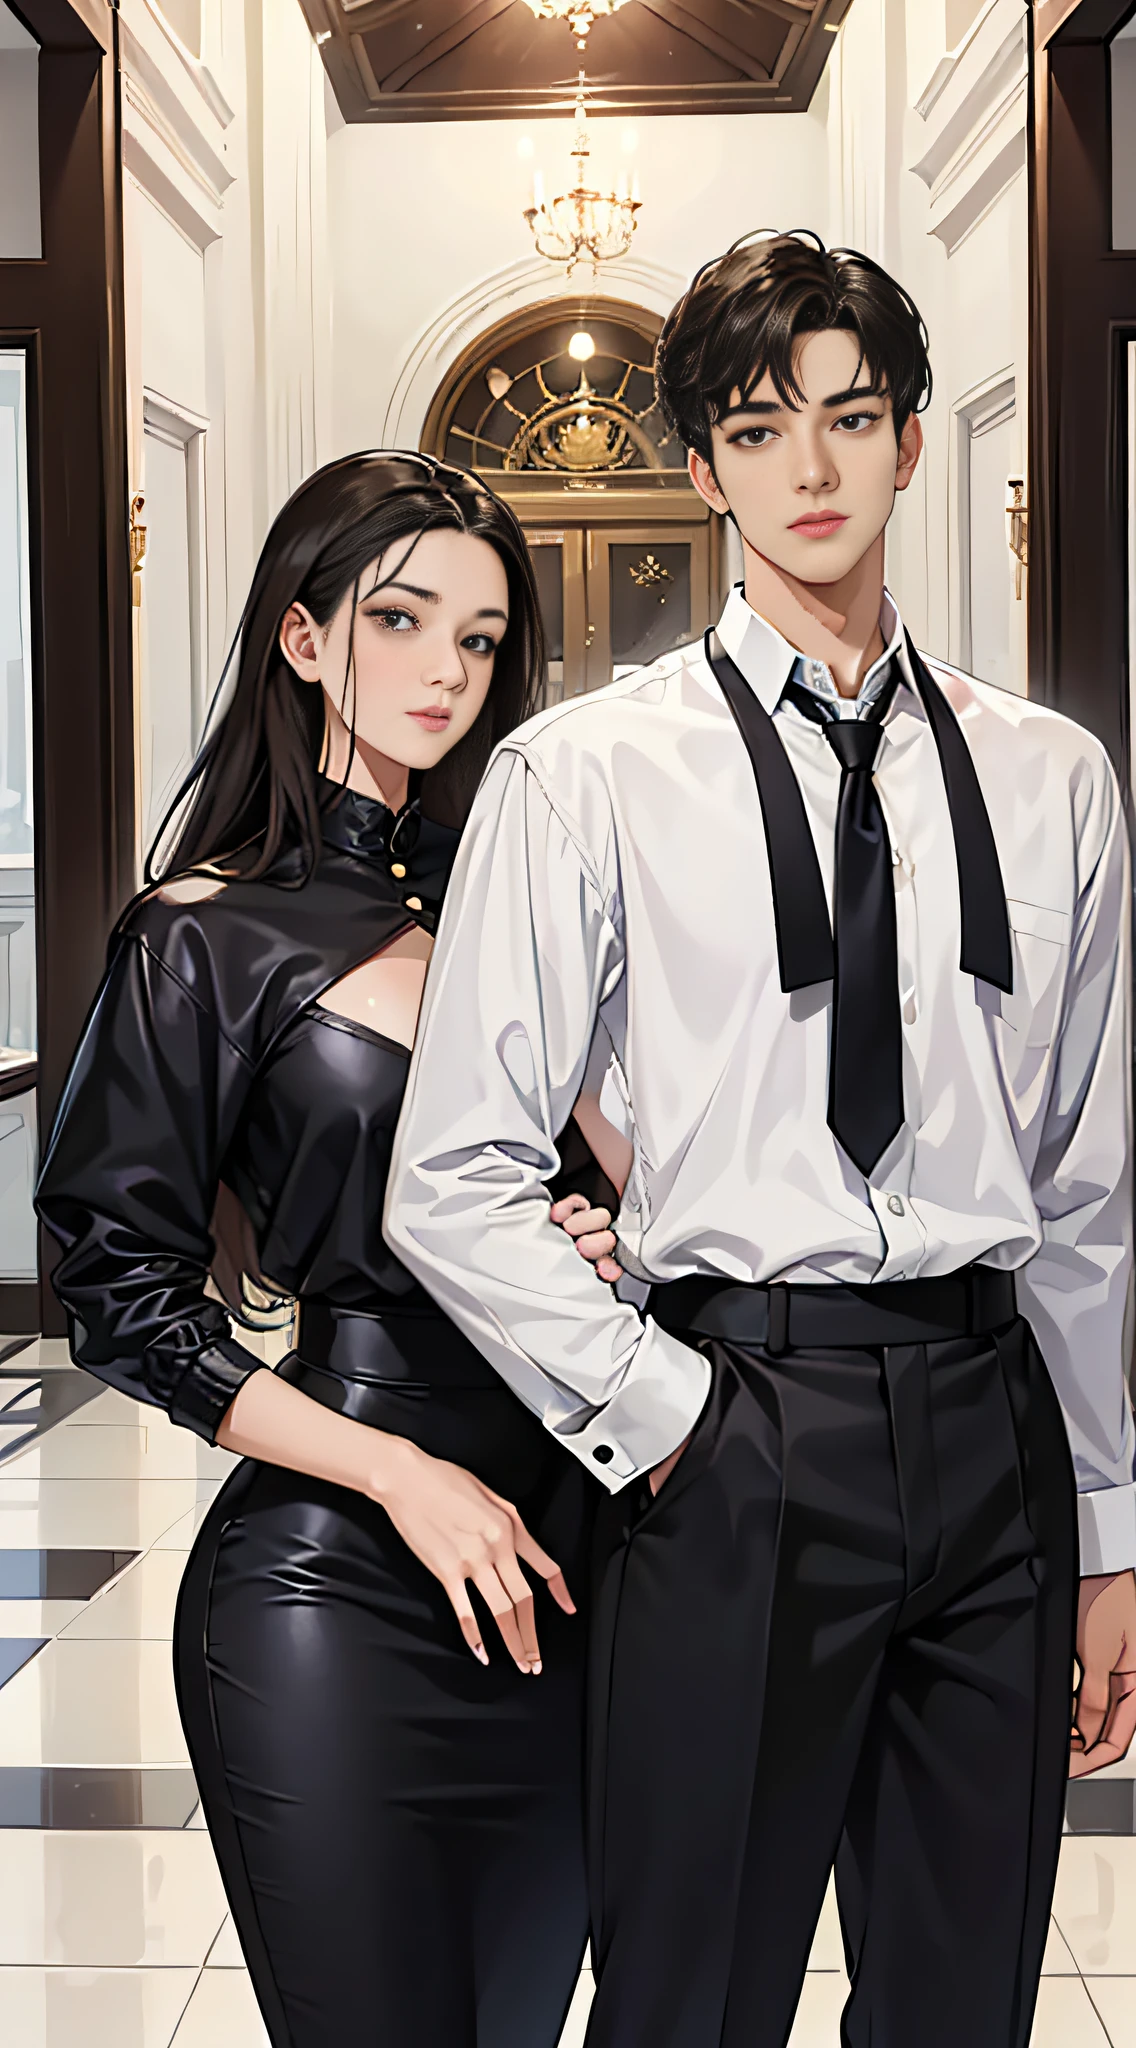 Shown is a man and a woman, with height difference, handsome, 20 years old, white shirt, black pants, back head, handsome, high appearance, high nose bridge, big eyes, double eyelids, mixed race, tall, black hair, brown eyes, symmetrical eyes, looking at the girl,, a woman wearing a beautiful skirt, long black hair, symmetrical eyes, big eyes, black eyes, there is a height difference